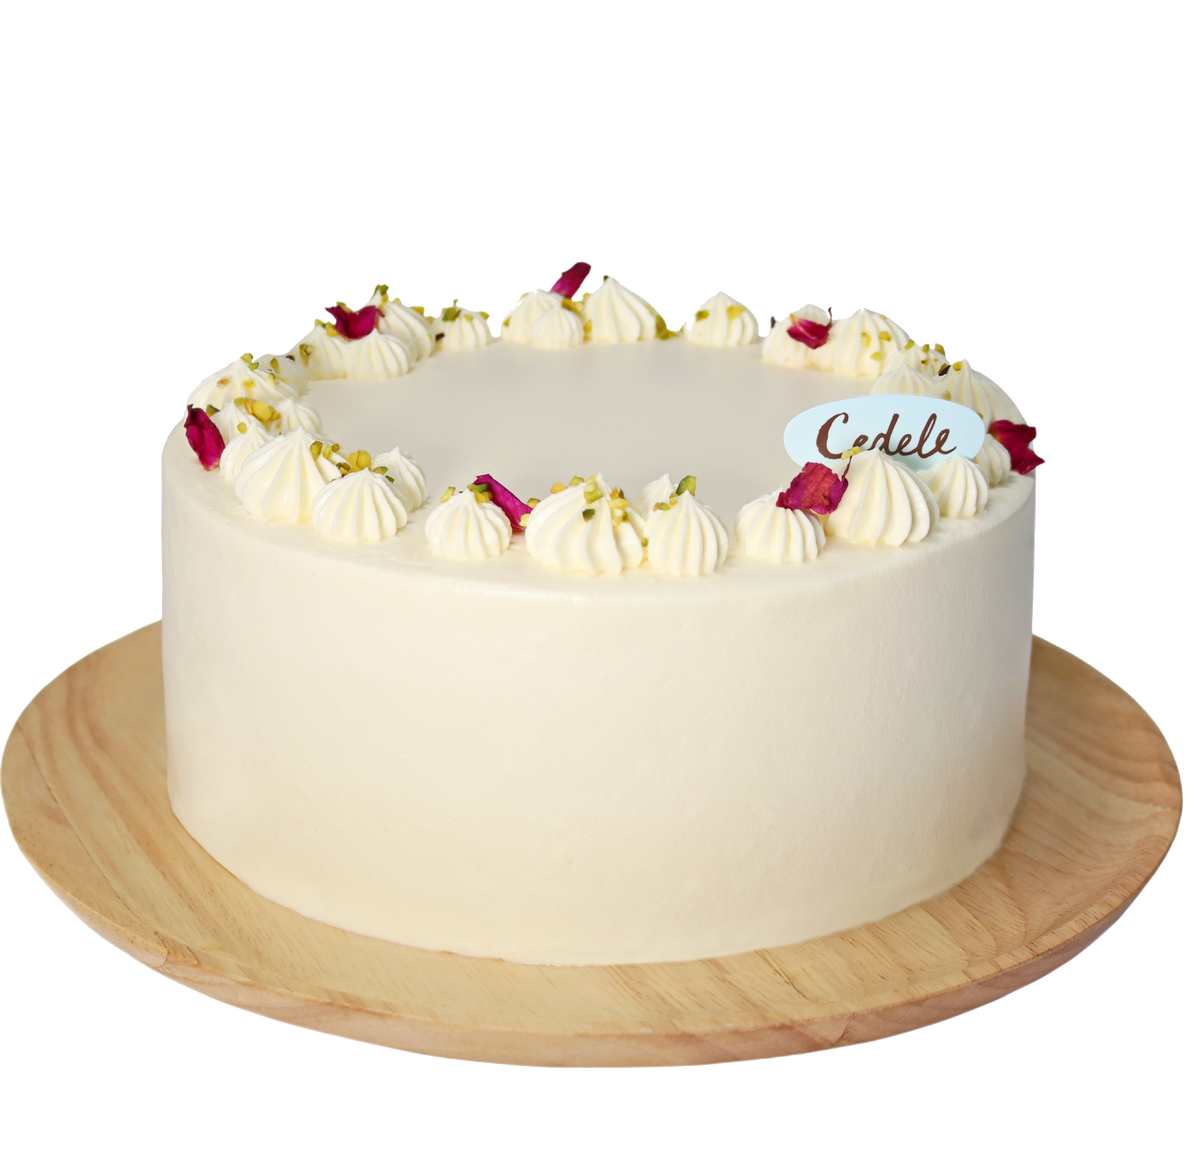 Share more than 82 rose lychee cake latest  indaotaonec